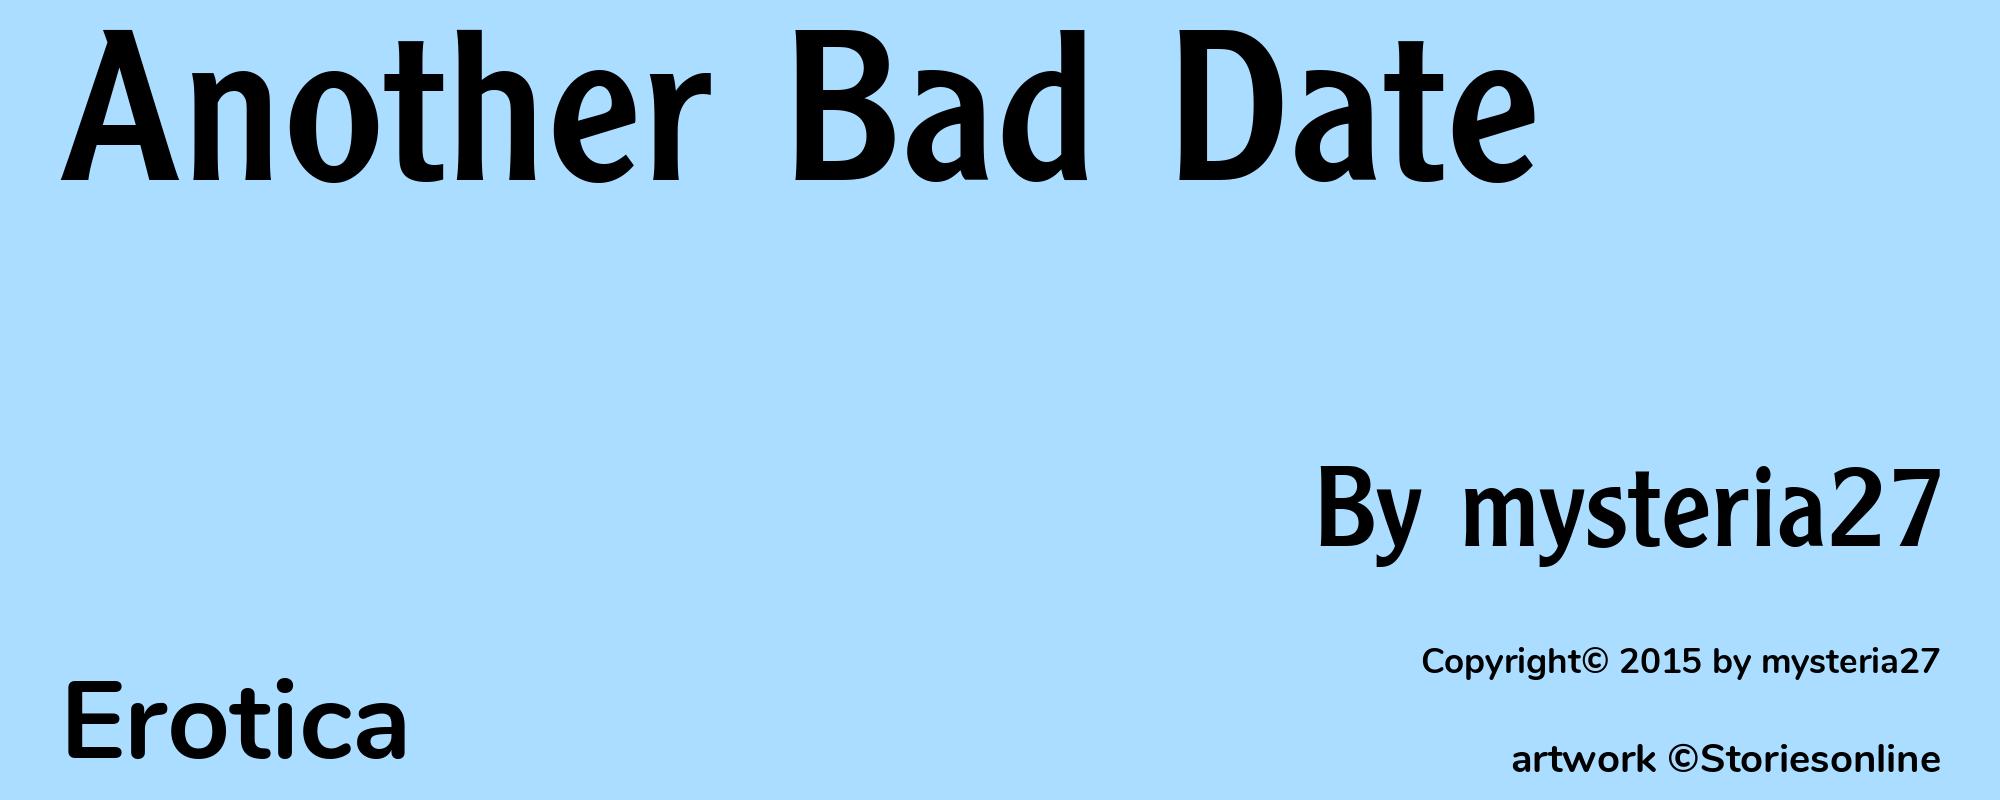 Another Bad Date - Cover